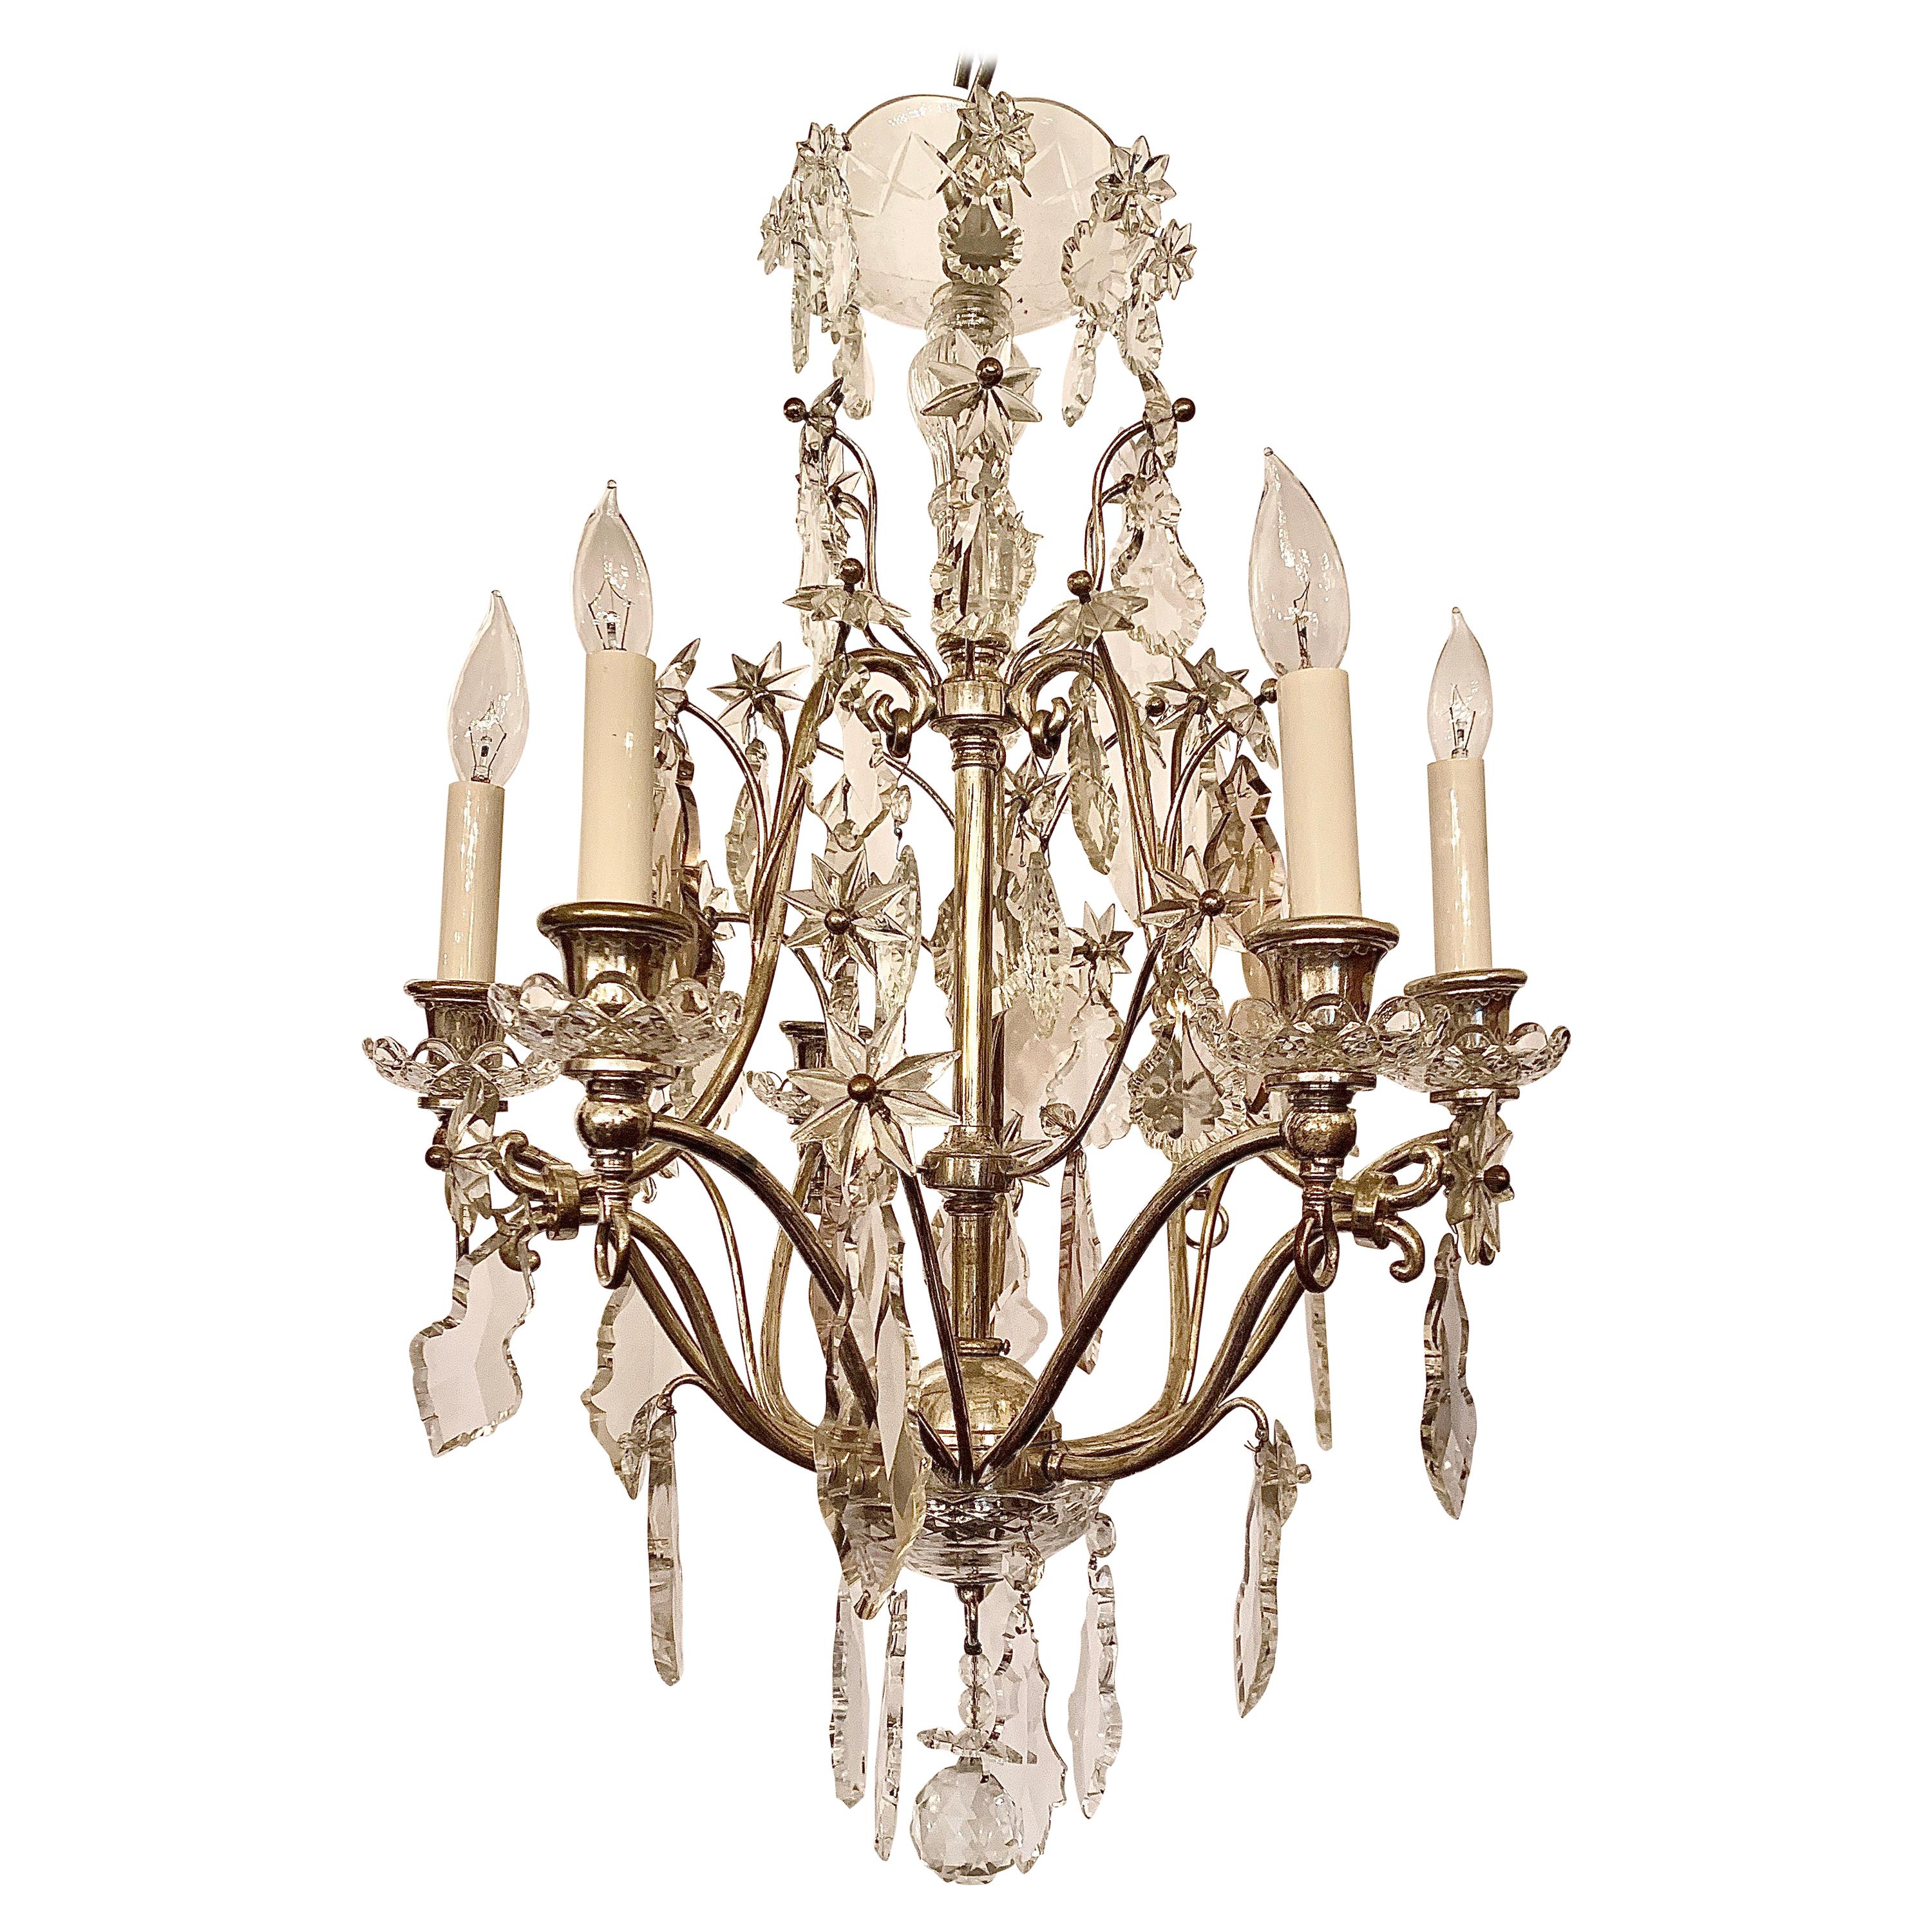 Antique French Baccarat Crystal Silvered Bronze Chandelier, Circa 1900-1920